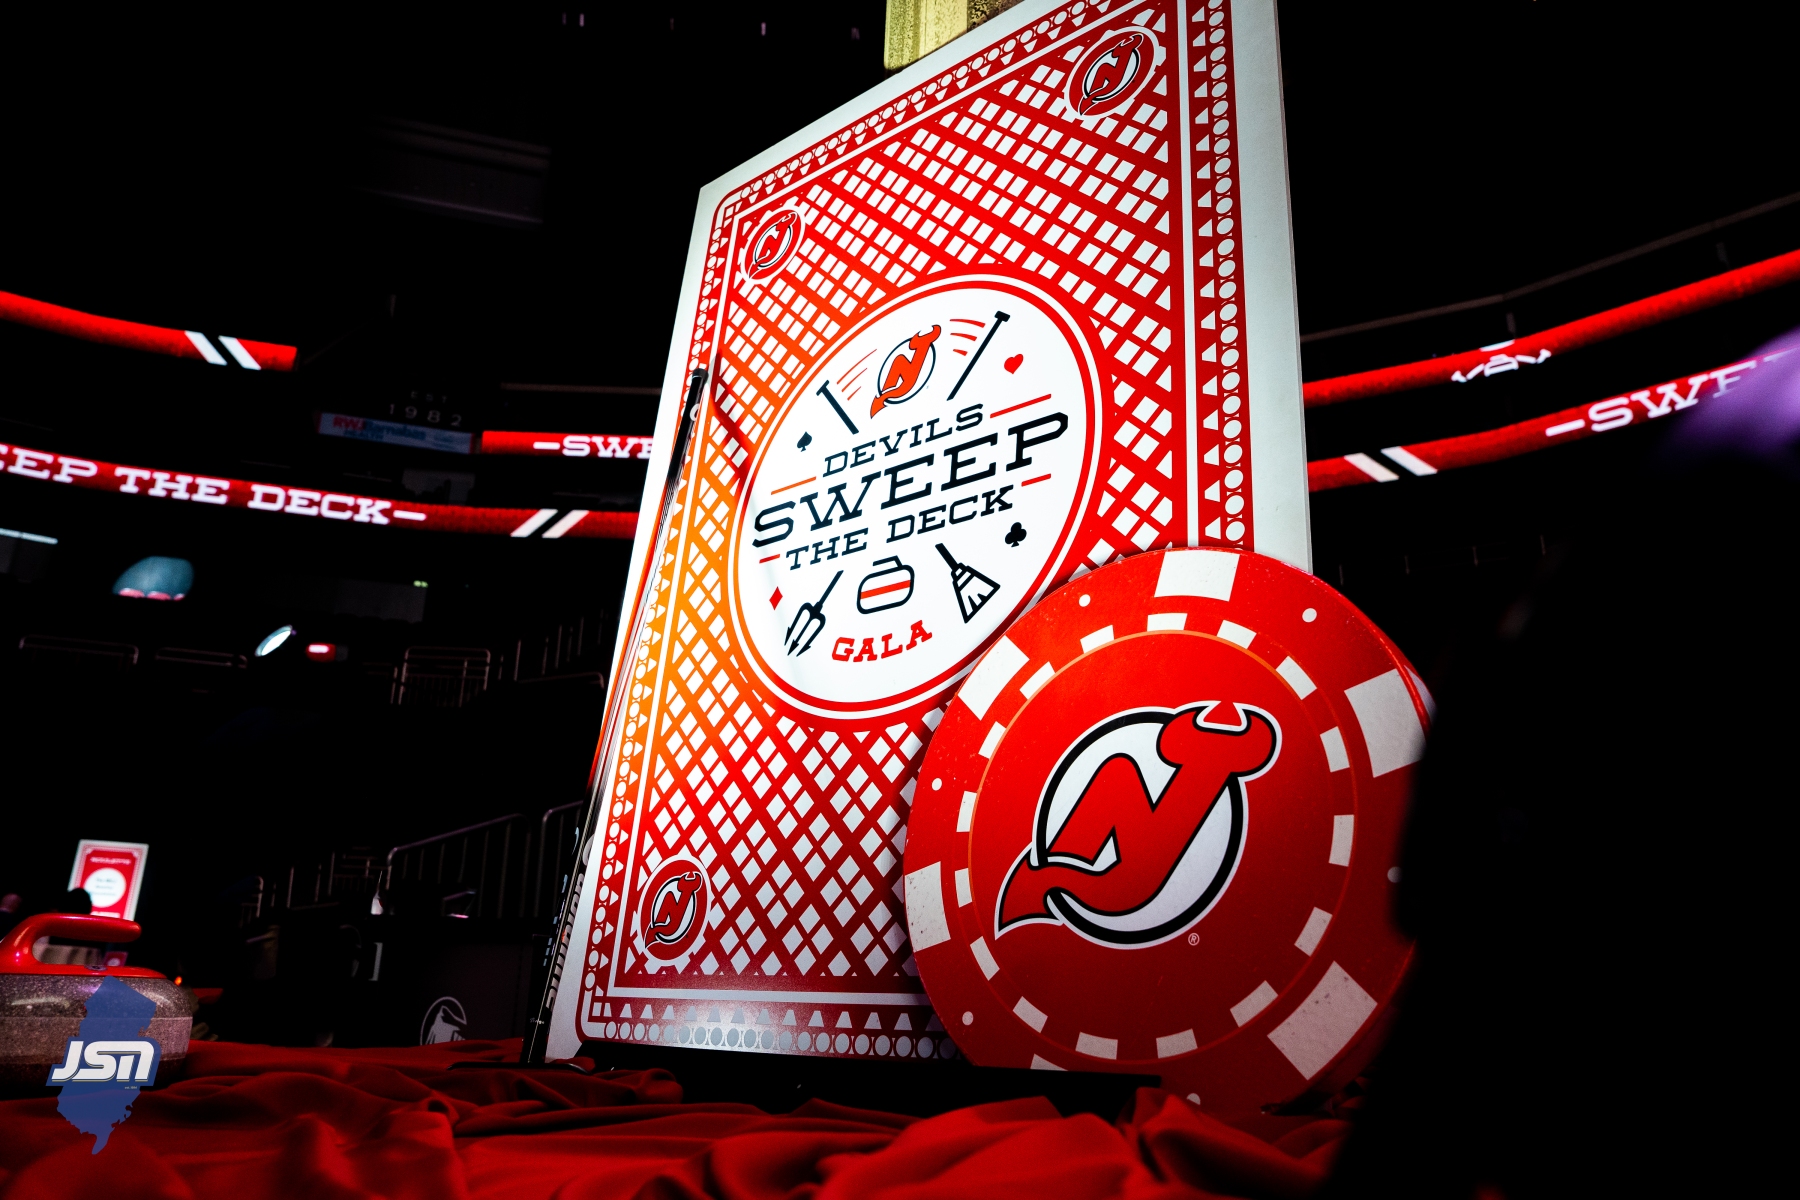 NJ Devils Sweep the Deck Charity Event - 2.7.23